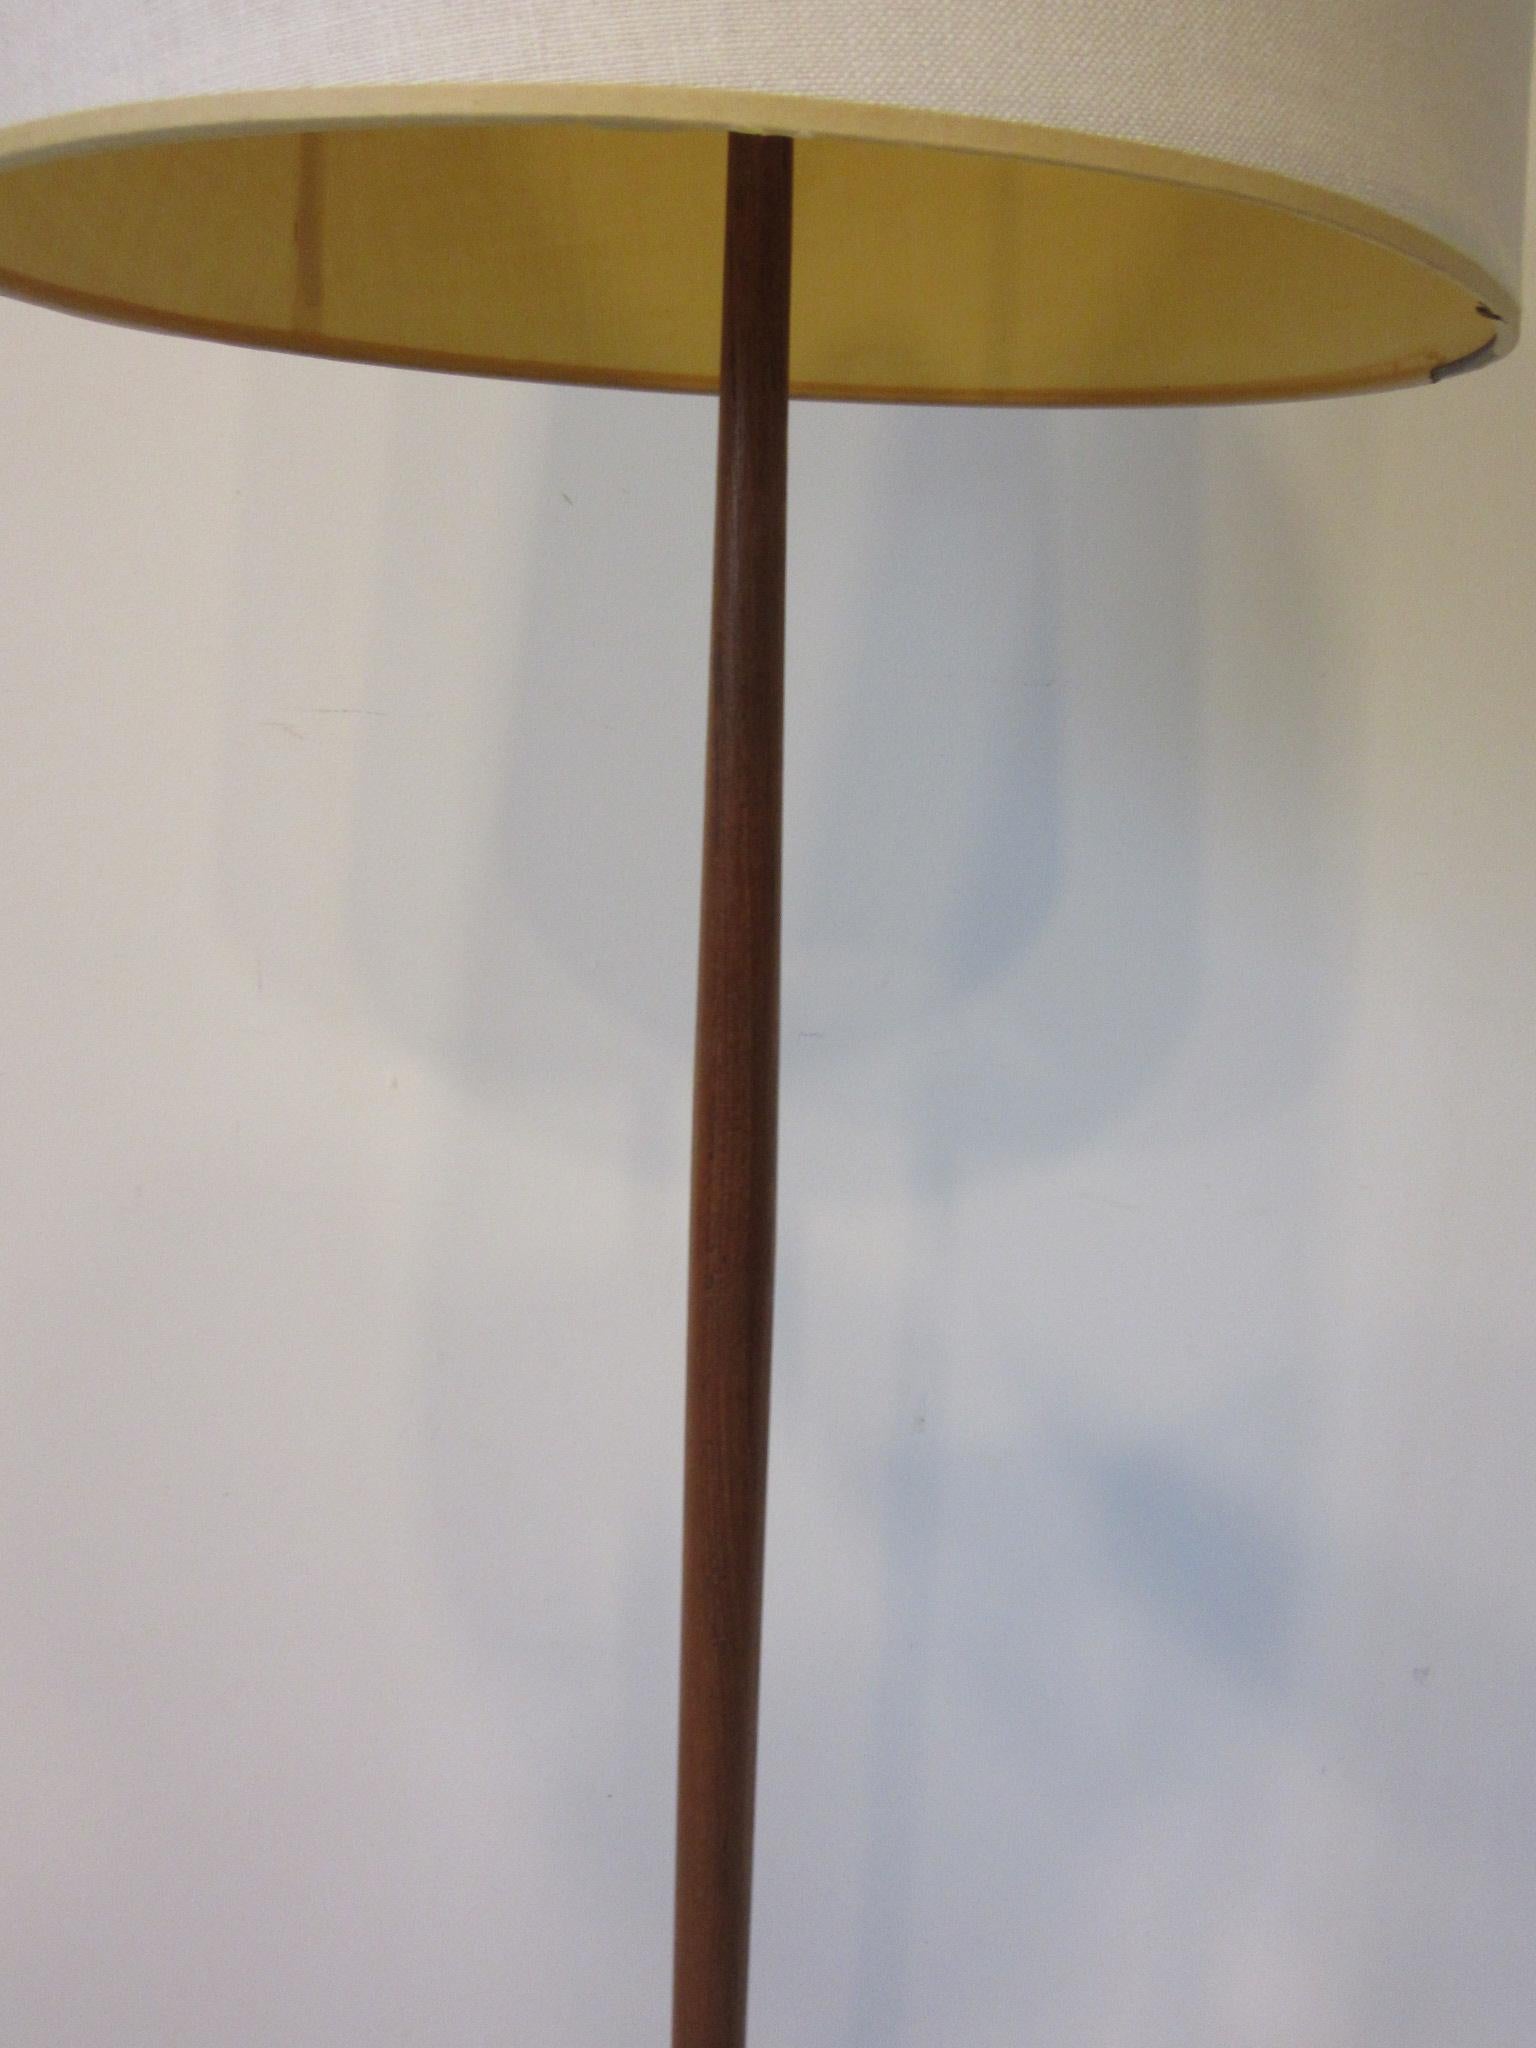 A wonderful Danish floor lamp with tapered shaft having brass detail to the round base which is very well weighted. A light and balanced look for that midcentury interior, made in Denmark.